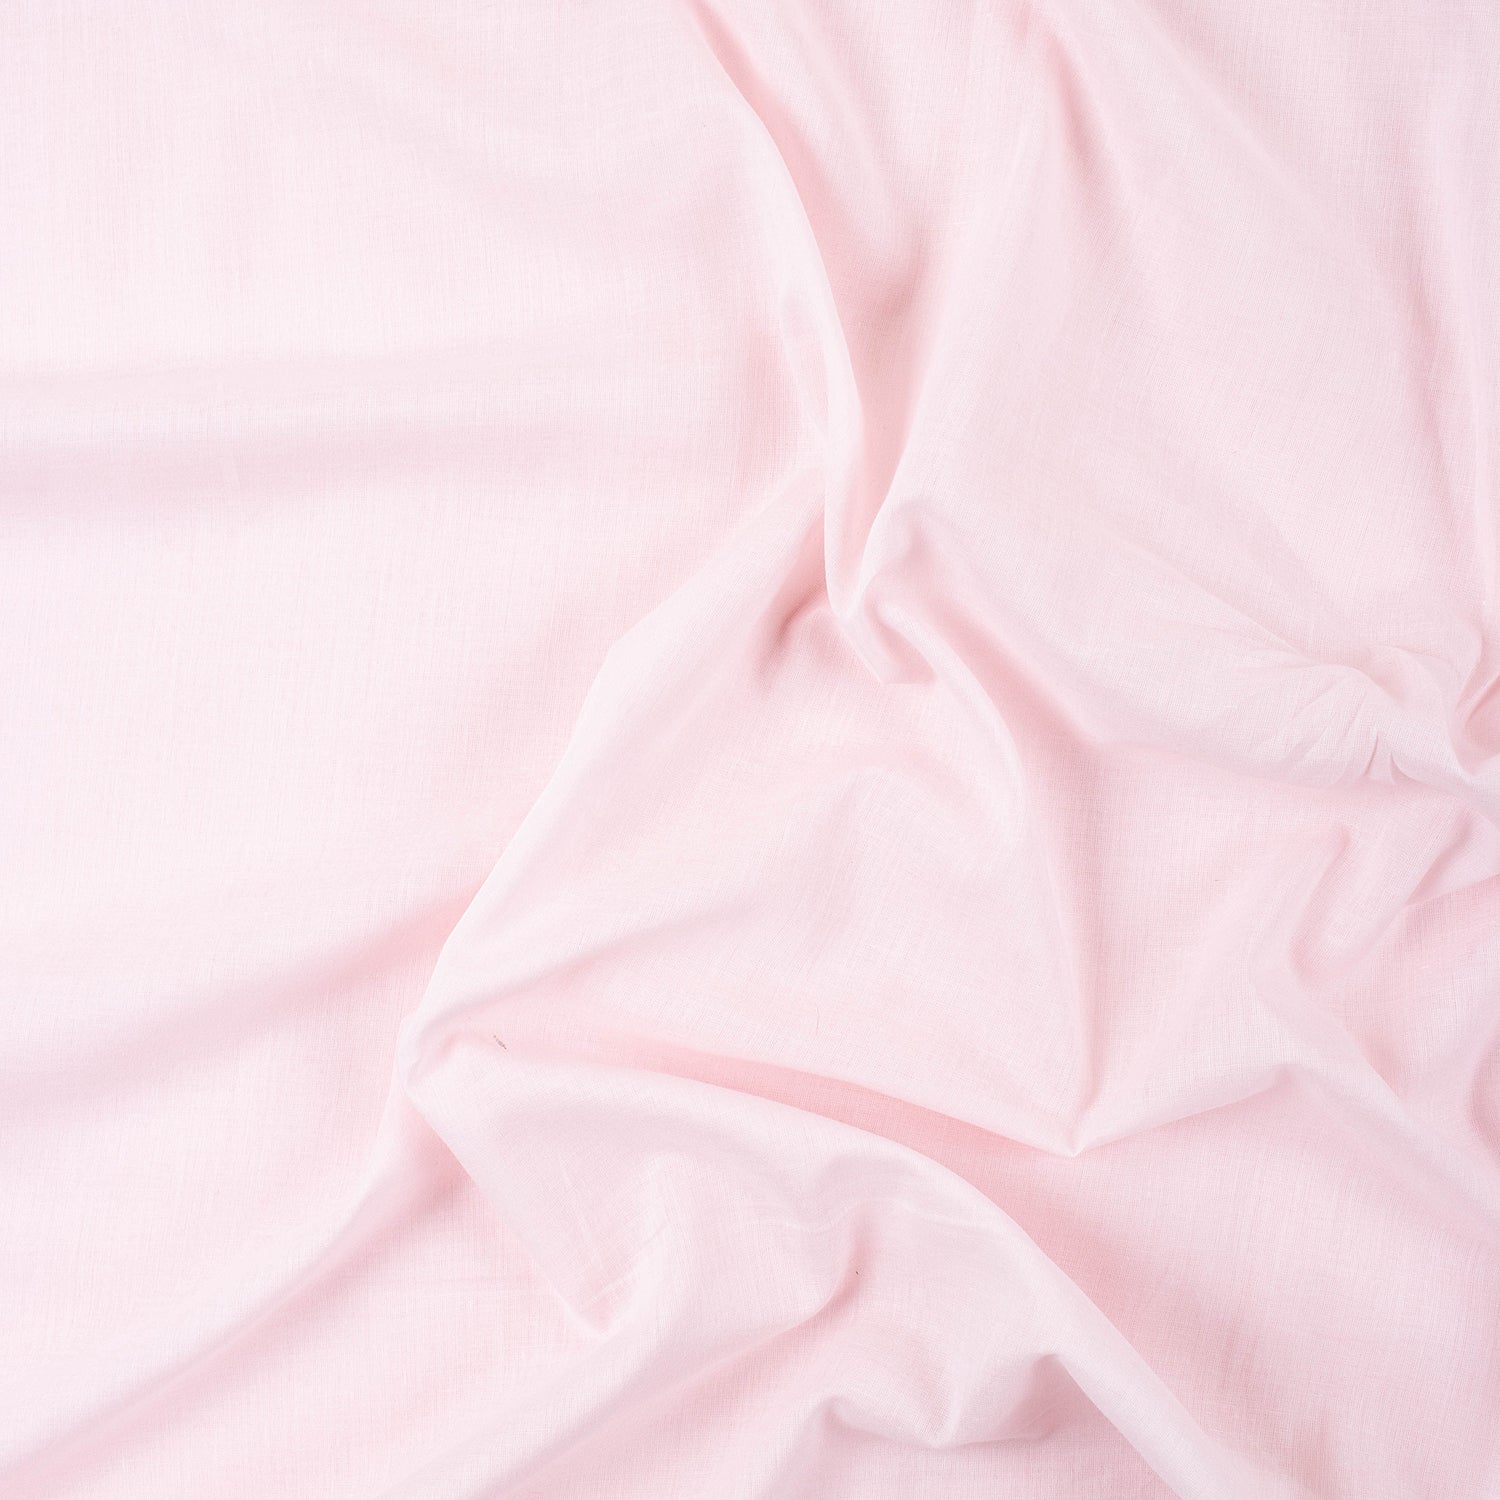 Solid White Pink Cotton Plain Fabric